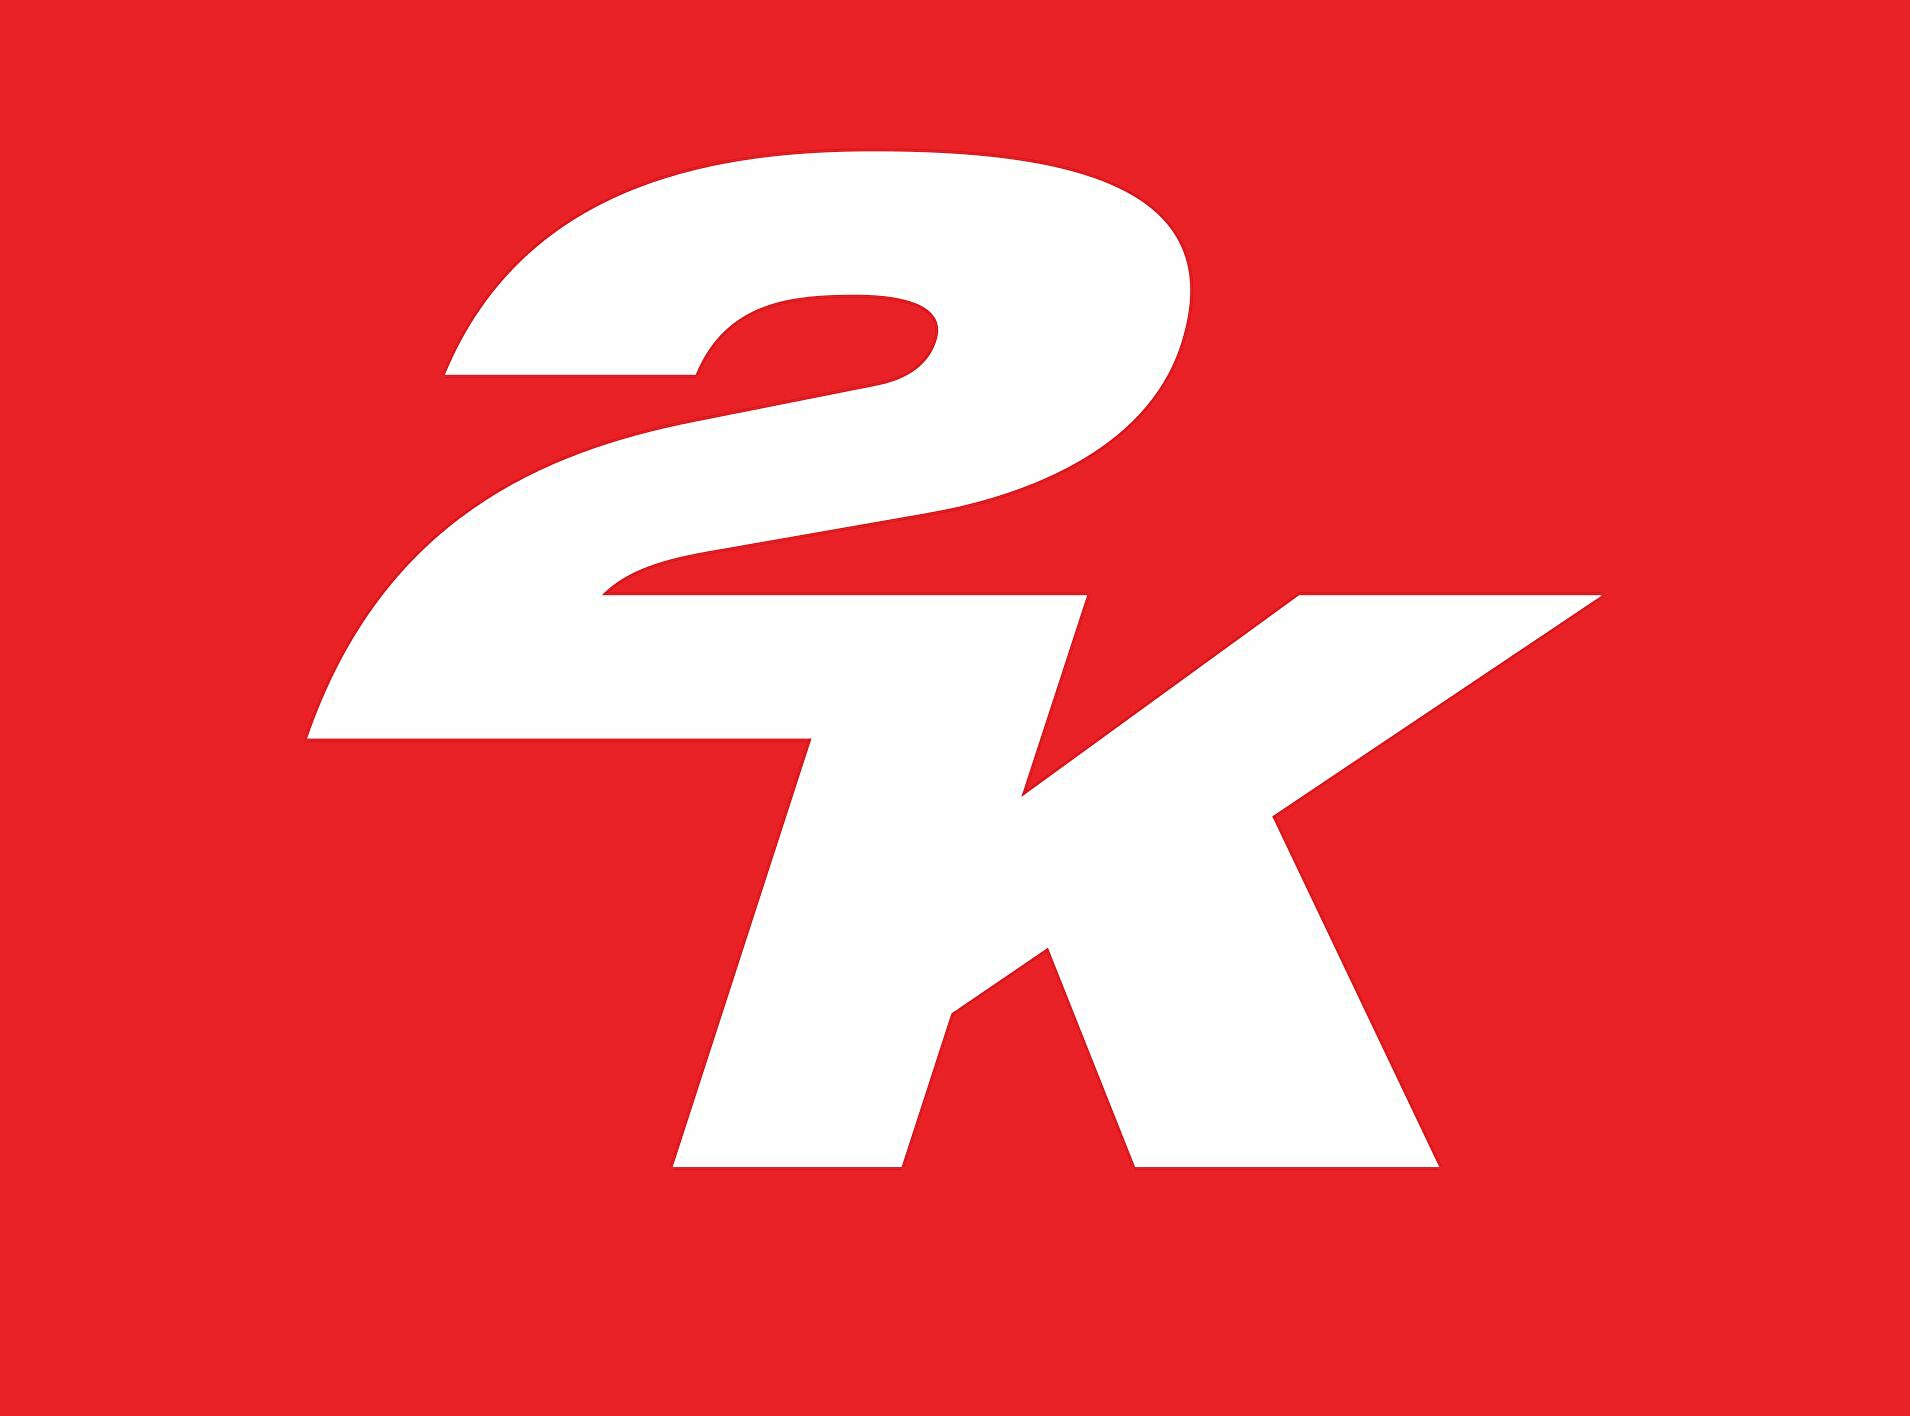 2K warns folks to reset passwords due to “unauthorized third party” gaining access to help desk platform